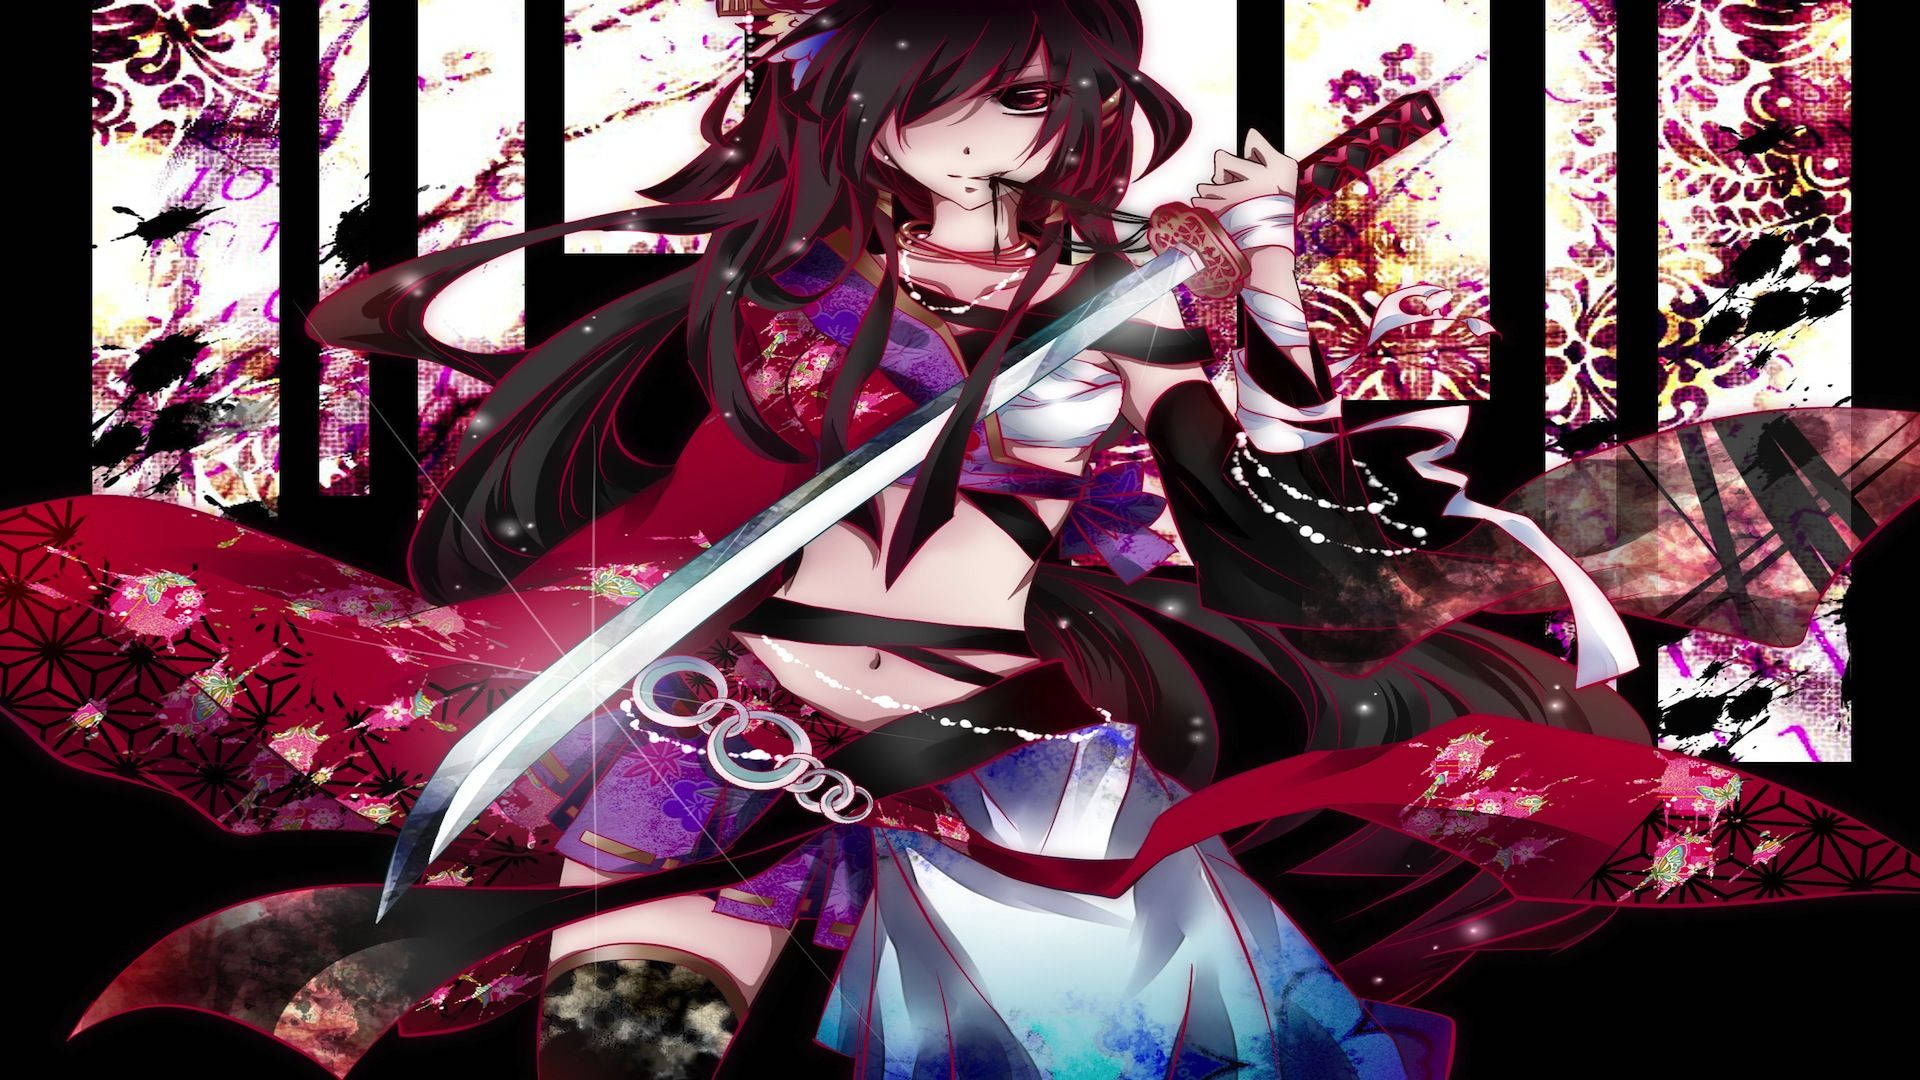 Anime girl holding sword and ready to fight wallpaper